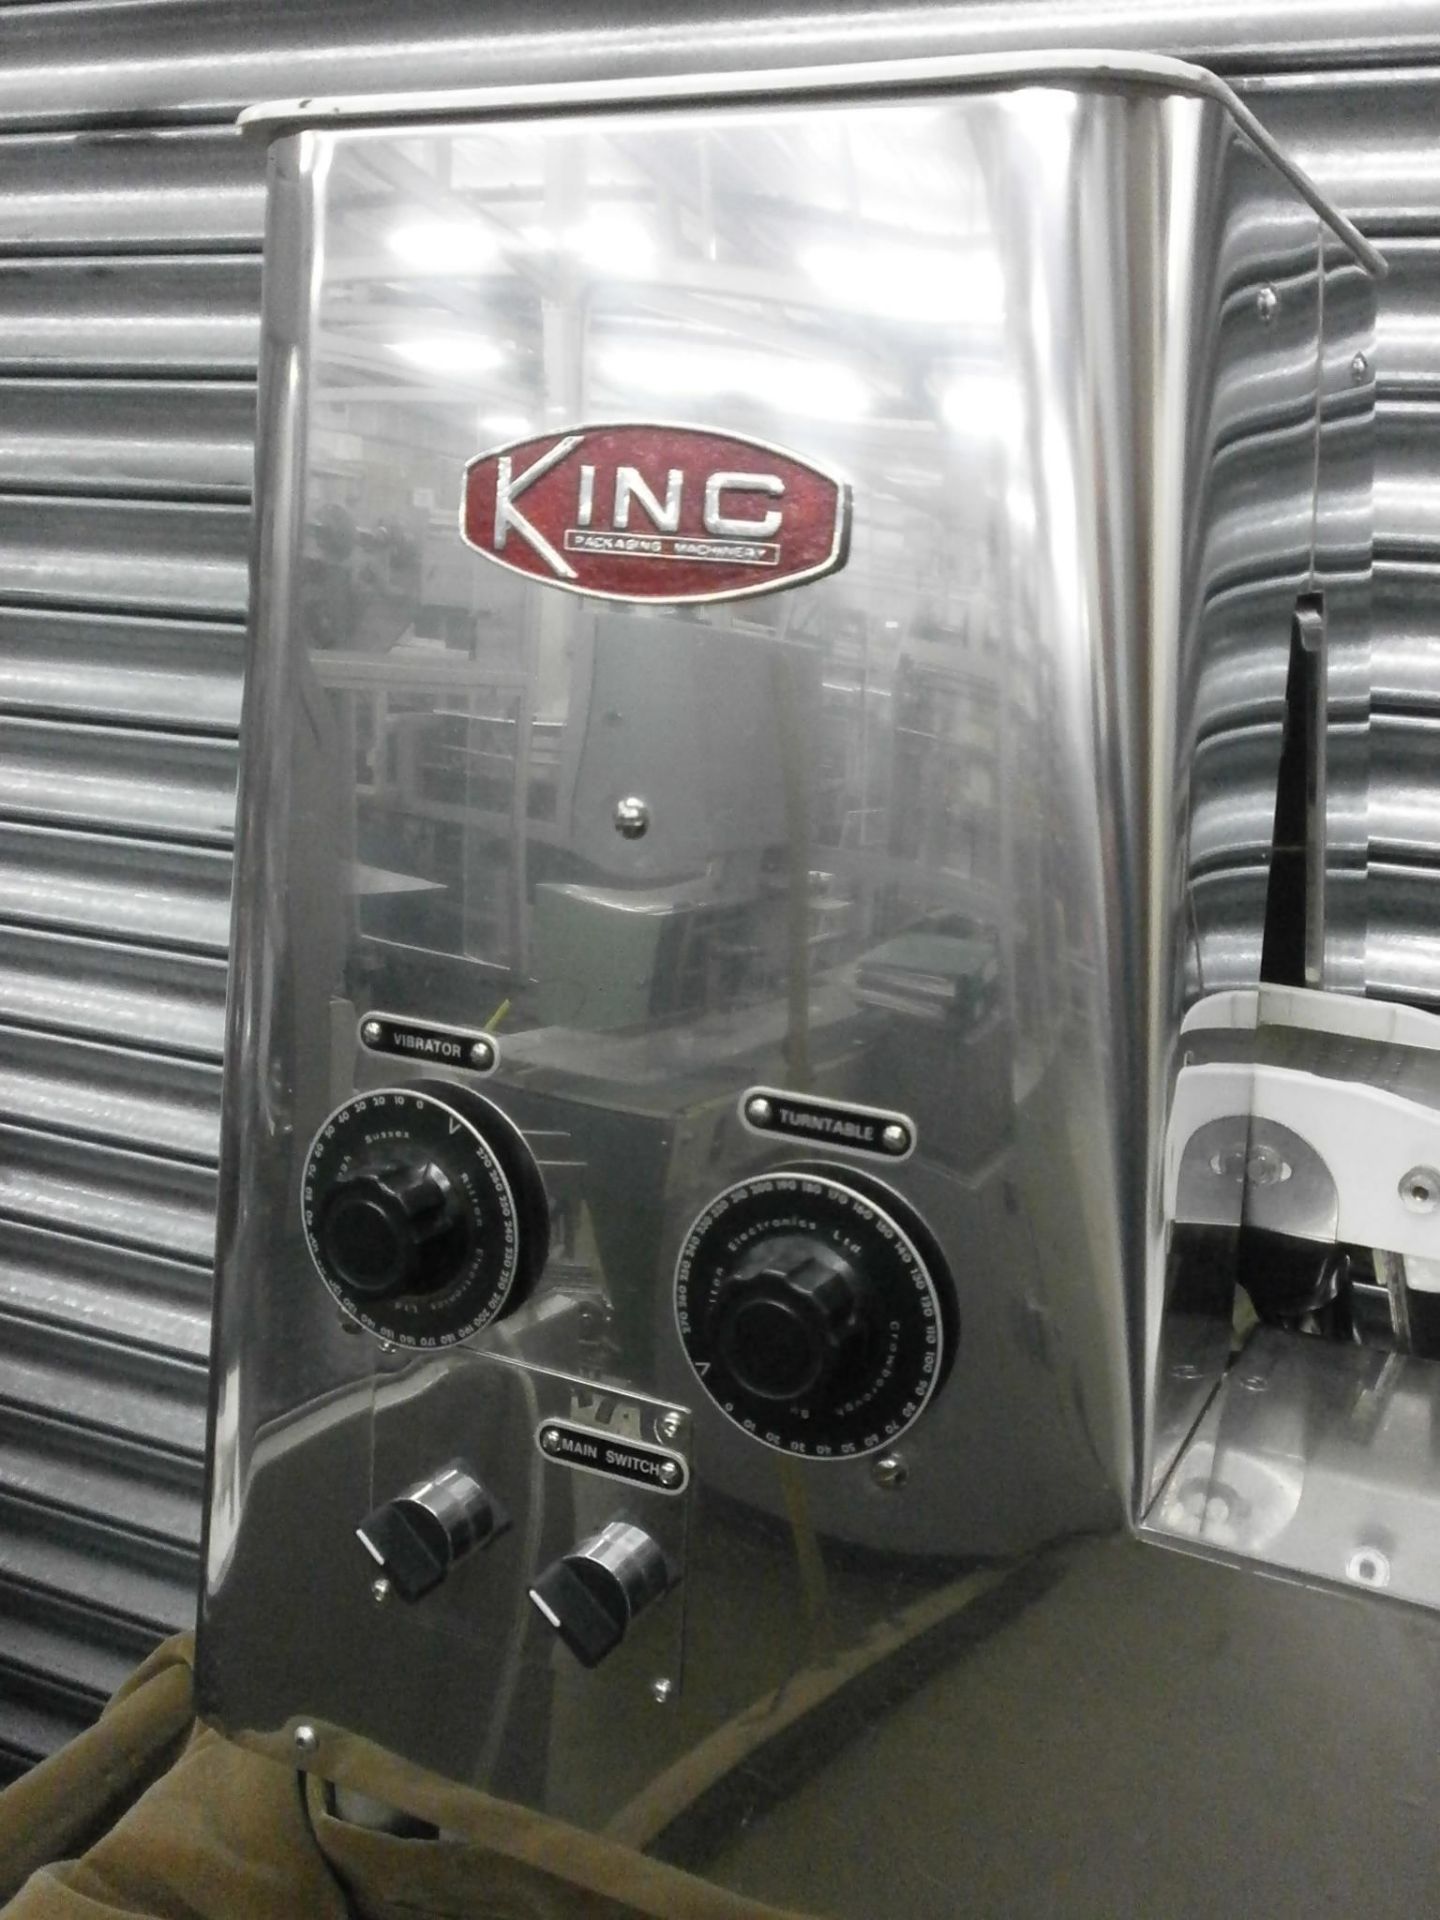 King TB4 Stainless Steel Tablet and Capsule Counter - Image 5 of 5